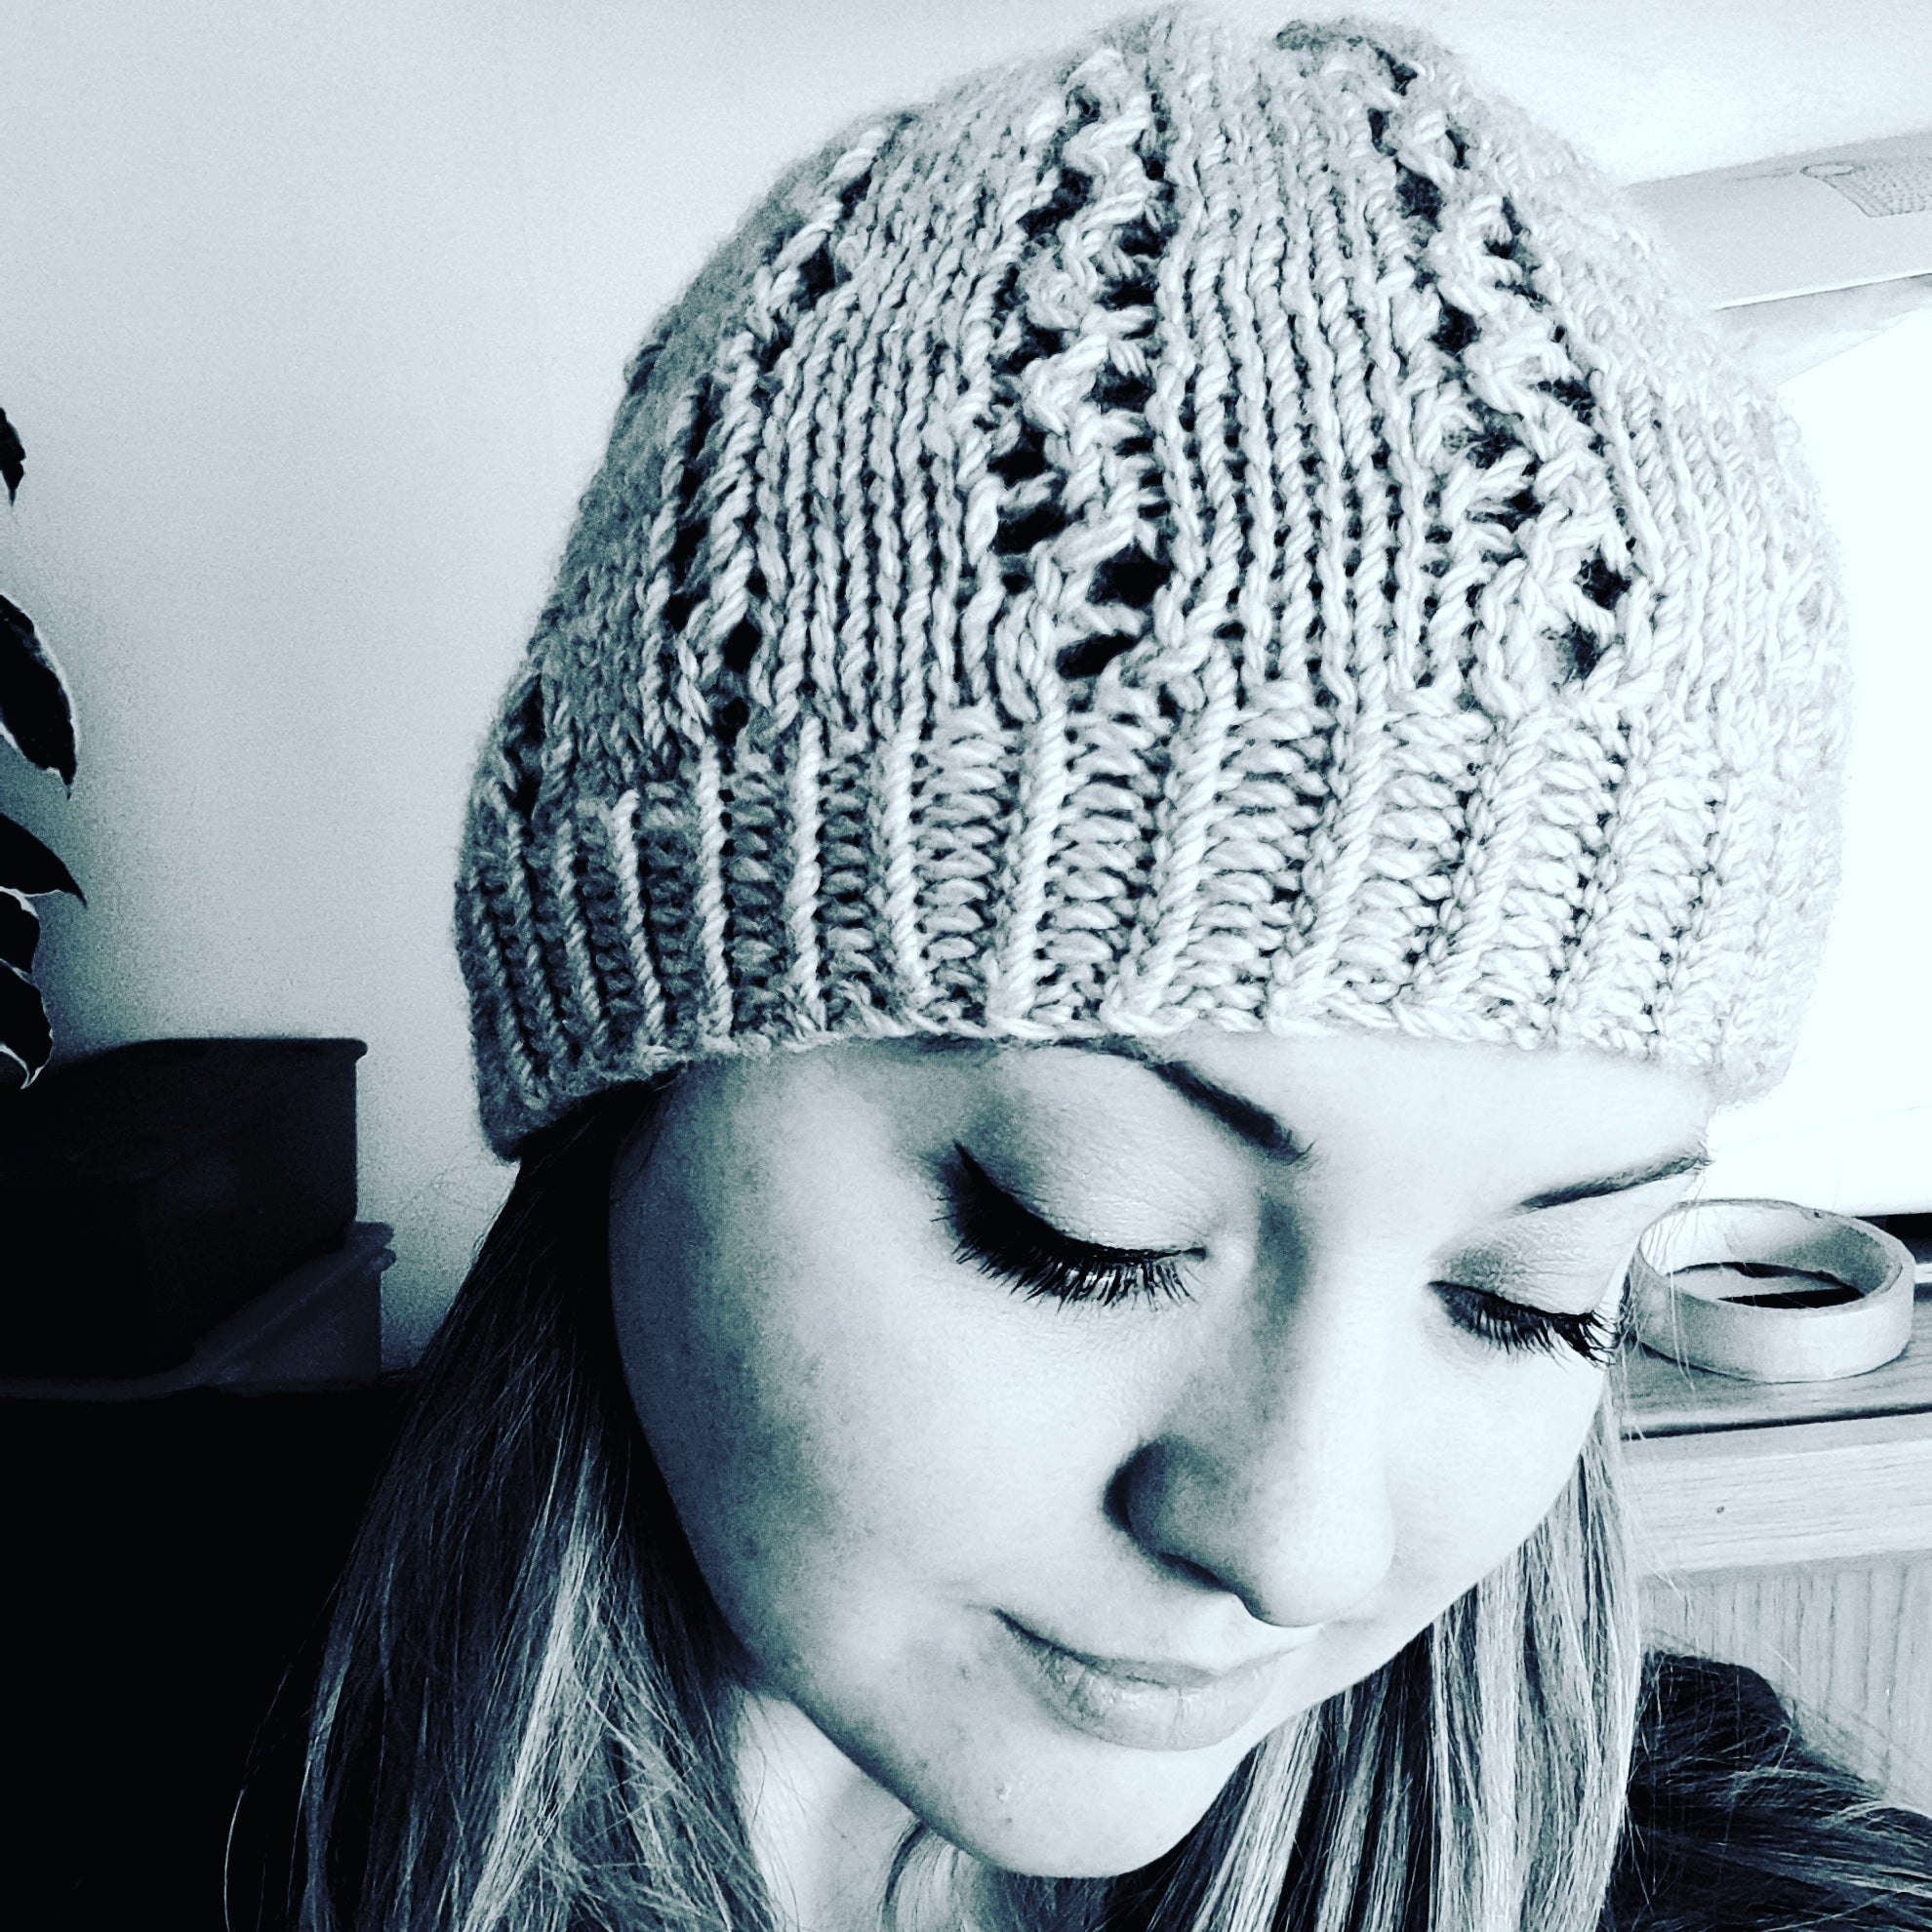 A black and white image of Hanna looking downwards wearing a grey beanie hat with cable detail stripes running up the height of the hat.